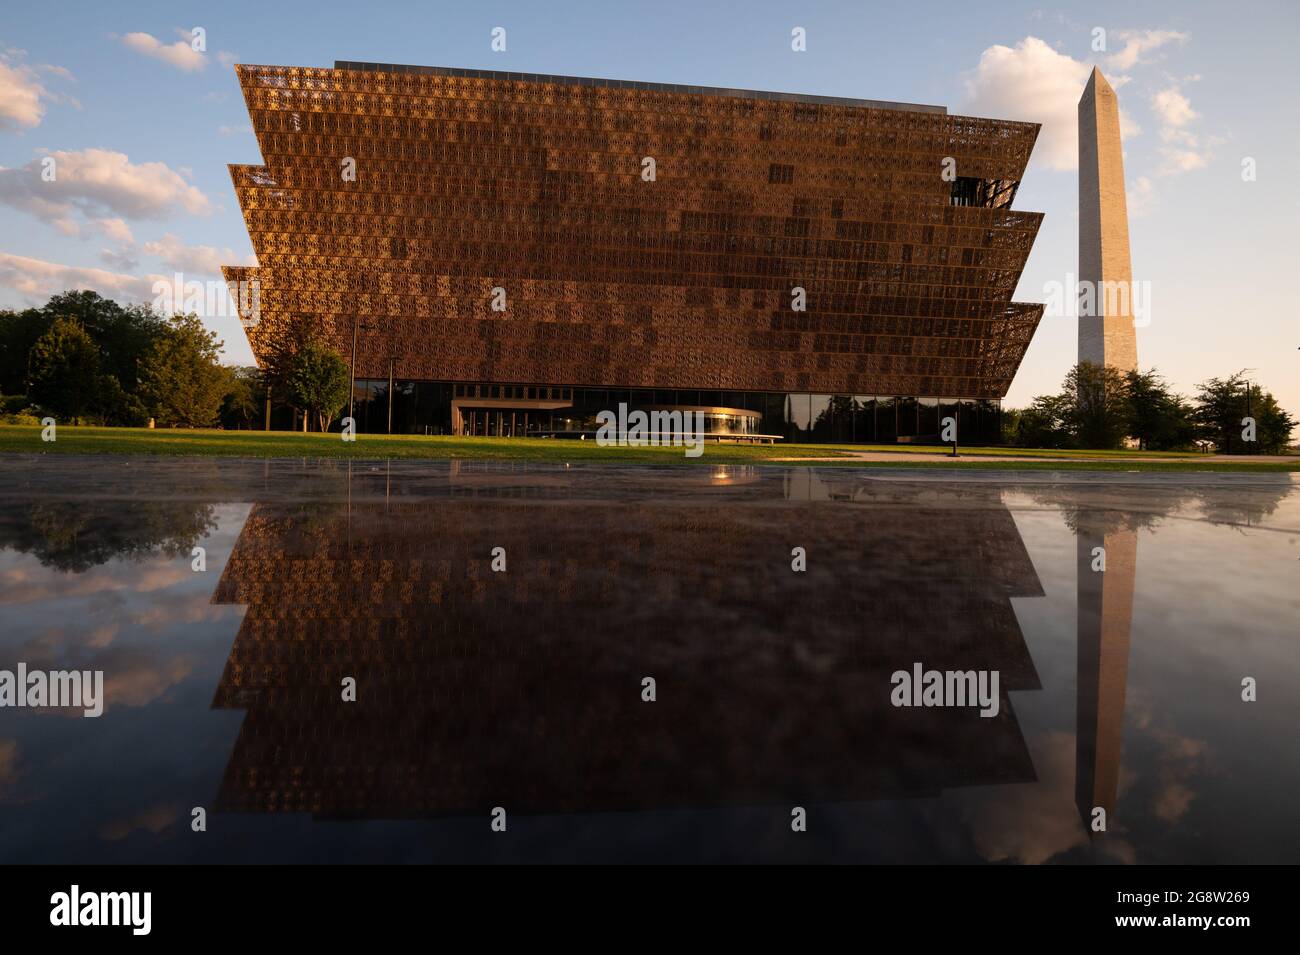 Washington, USA. 23rd July, 2021. A general view of the Smithsonian National Museum of African American History and Culture and the Washington Monument, in Washington, DC, on Thursday, July 22, 2021, amid the coronavirus pandemic. As the Delta variant of COVID-19 spreads rapidly in the America and around the world, this week in Washington negotiations over infrastructure legislation have continued in Congress. (Graeme Sloan/Sipa USA) Credit: Sipa USA/Alamy Live News Stock Photo